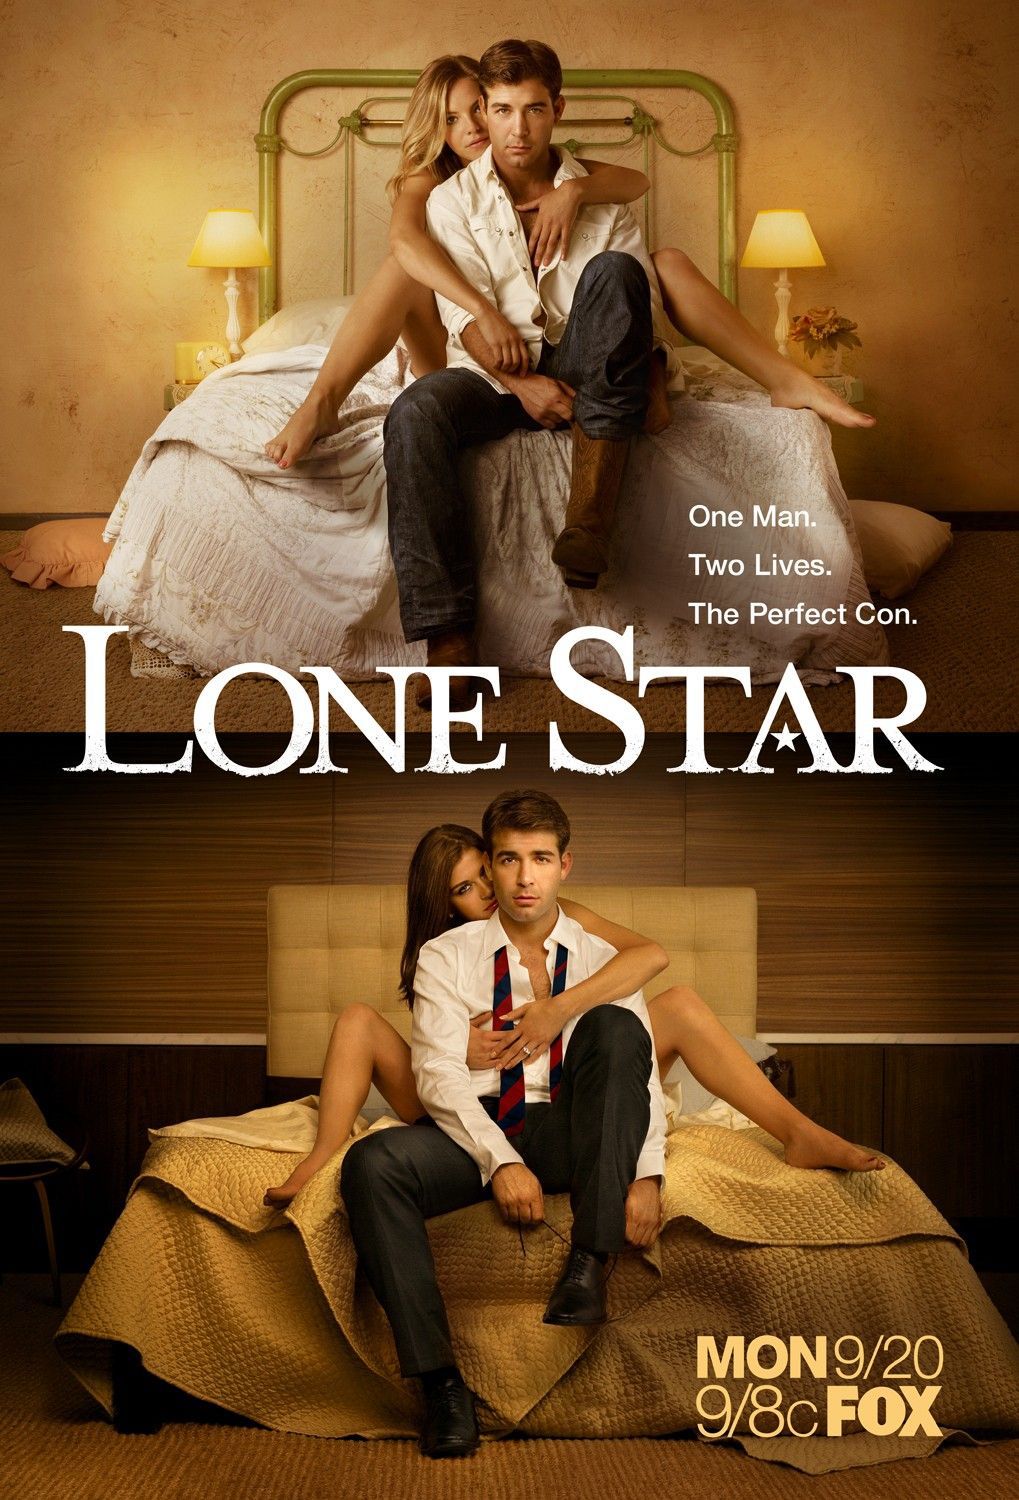 Lone Star - Série (2010) streaming VF gratuit complet